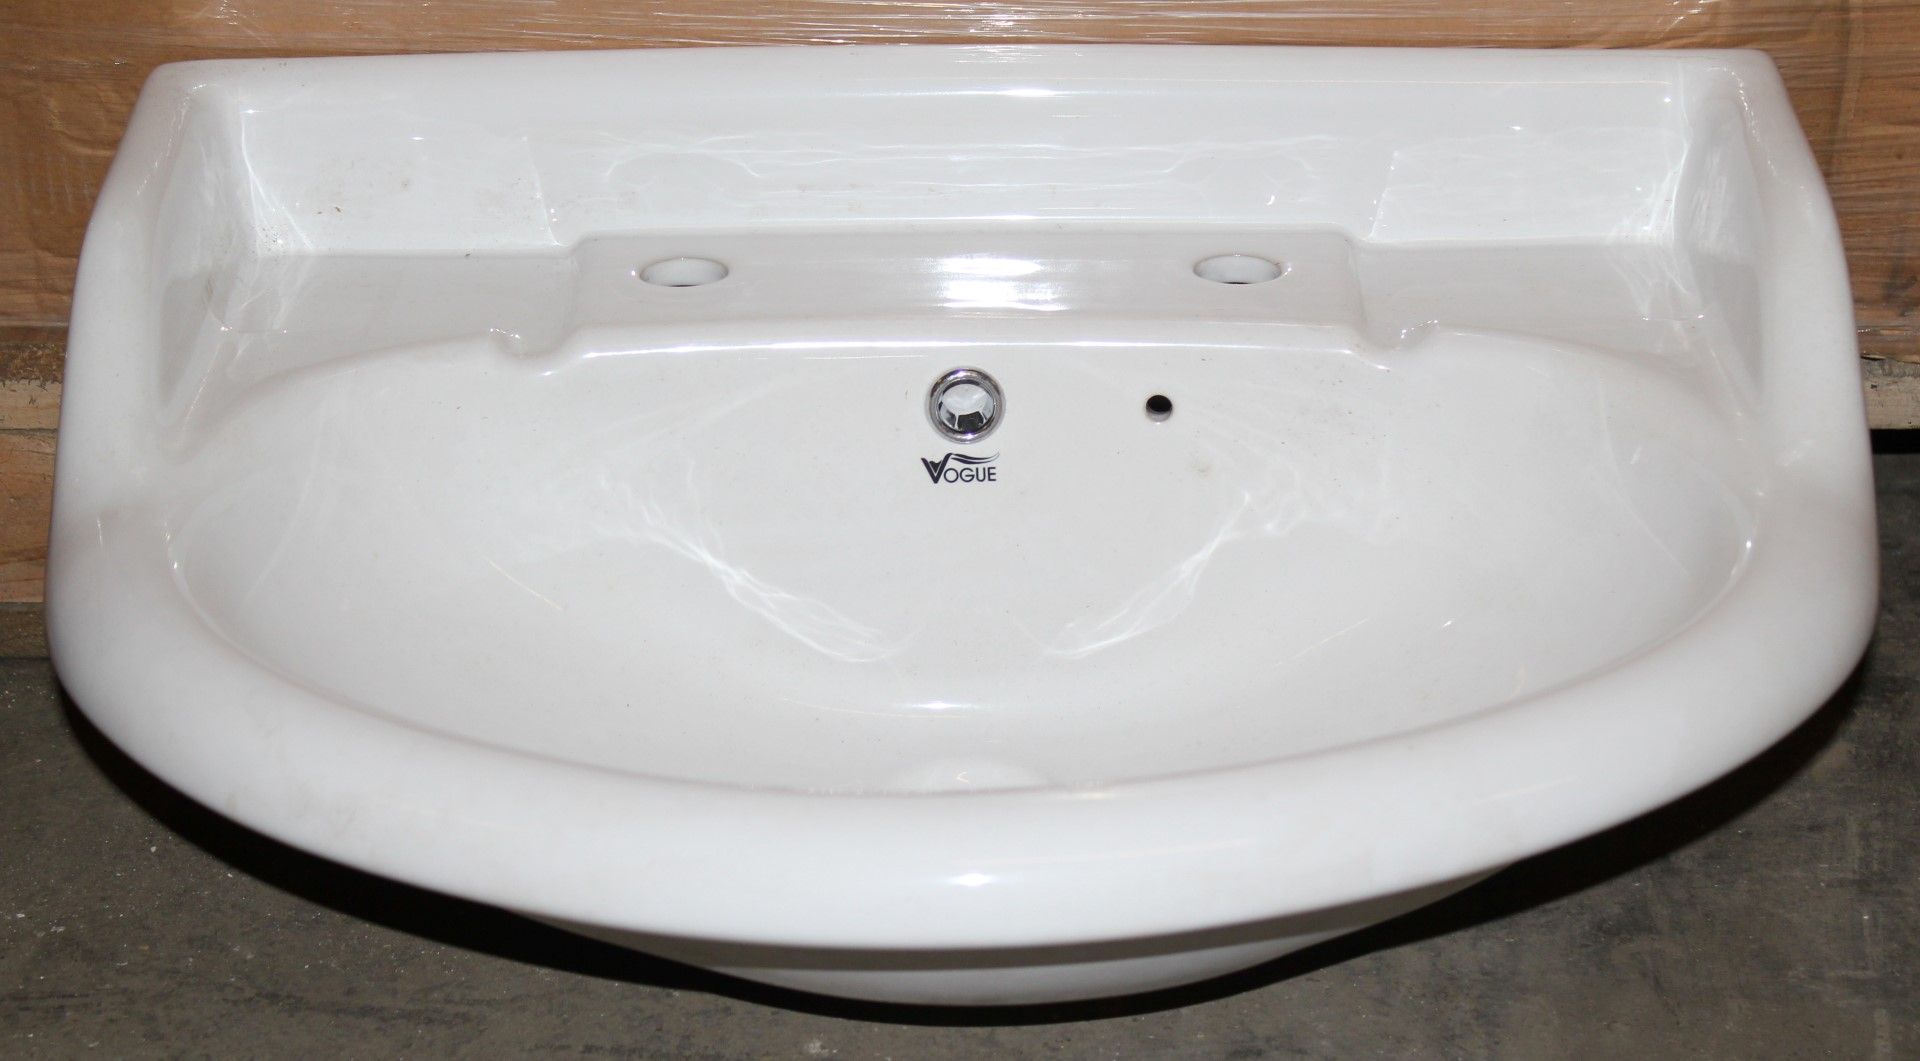 20 x Vogue Bathrooms HEYWOOD Two Tap Hole SINK BASINS With Pedestals - 580mm Width - Brand New Boxed - Image 3 of 5